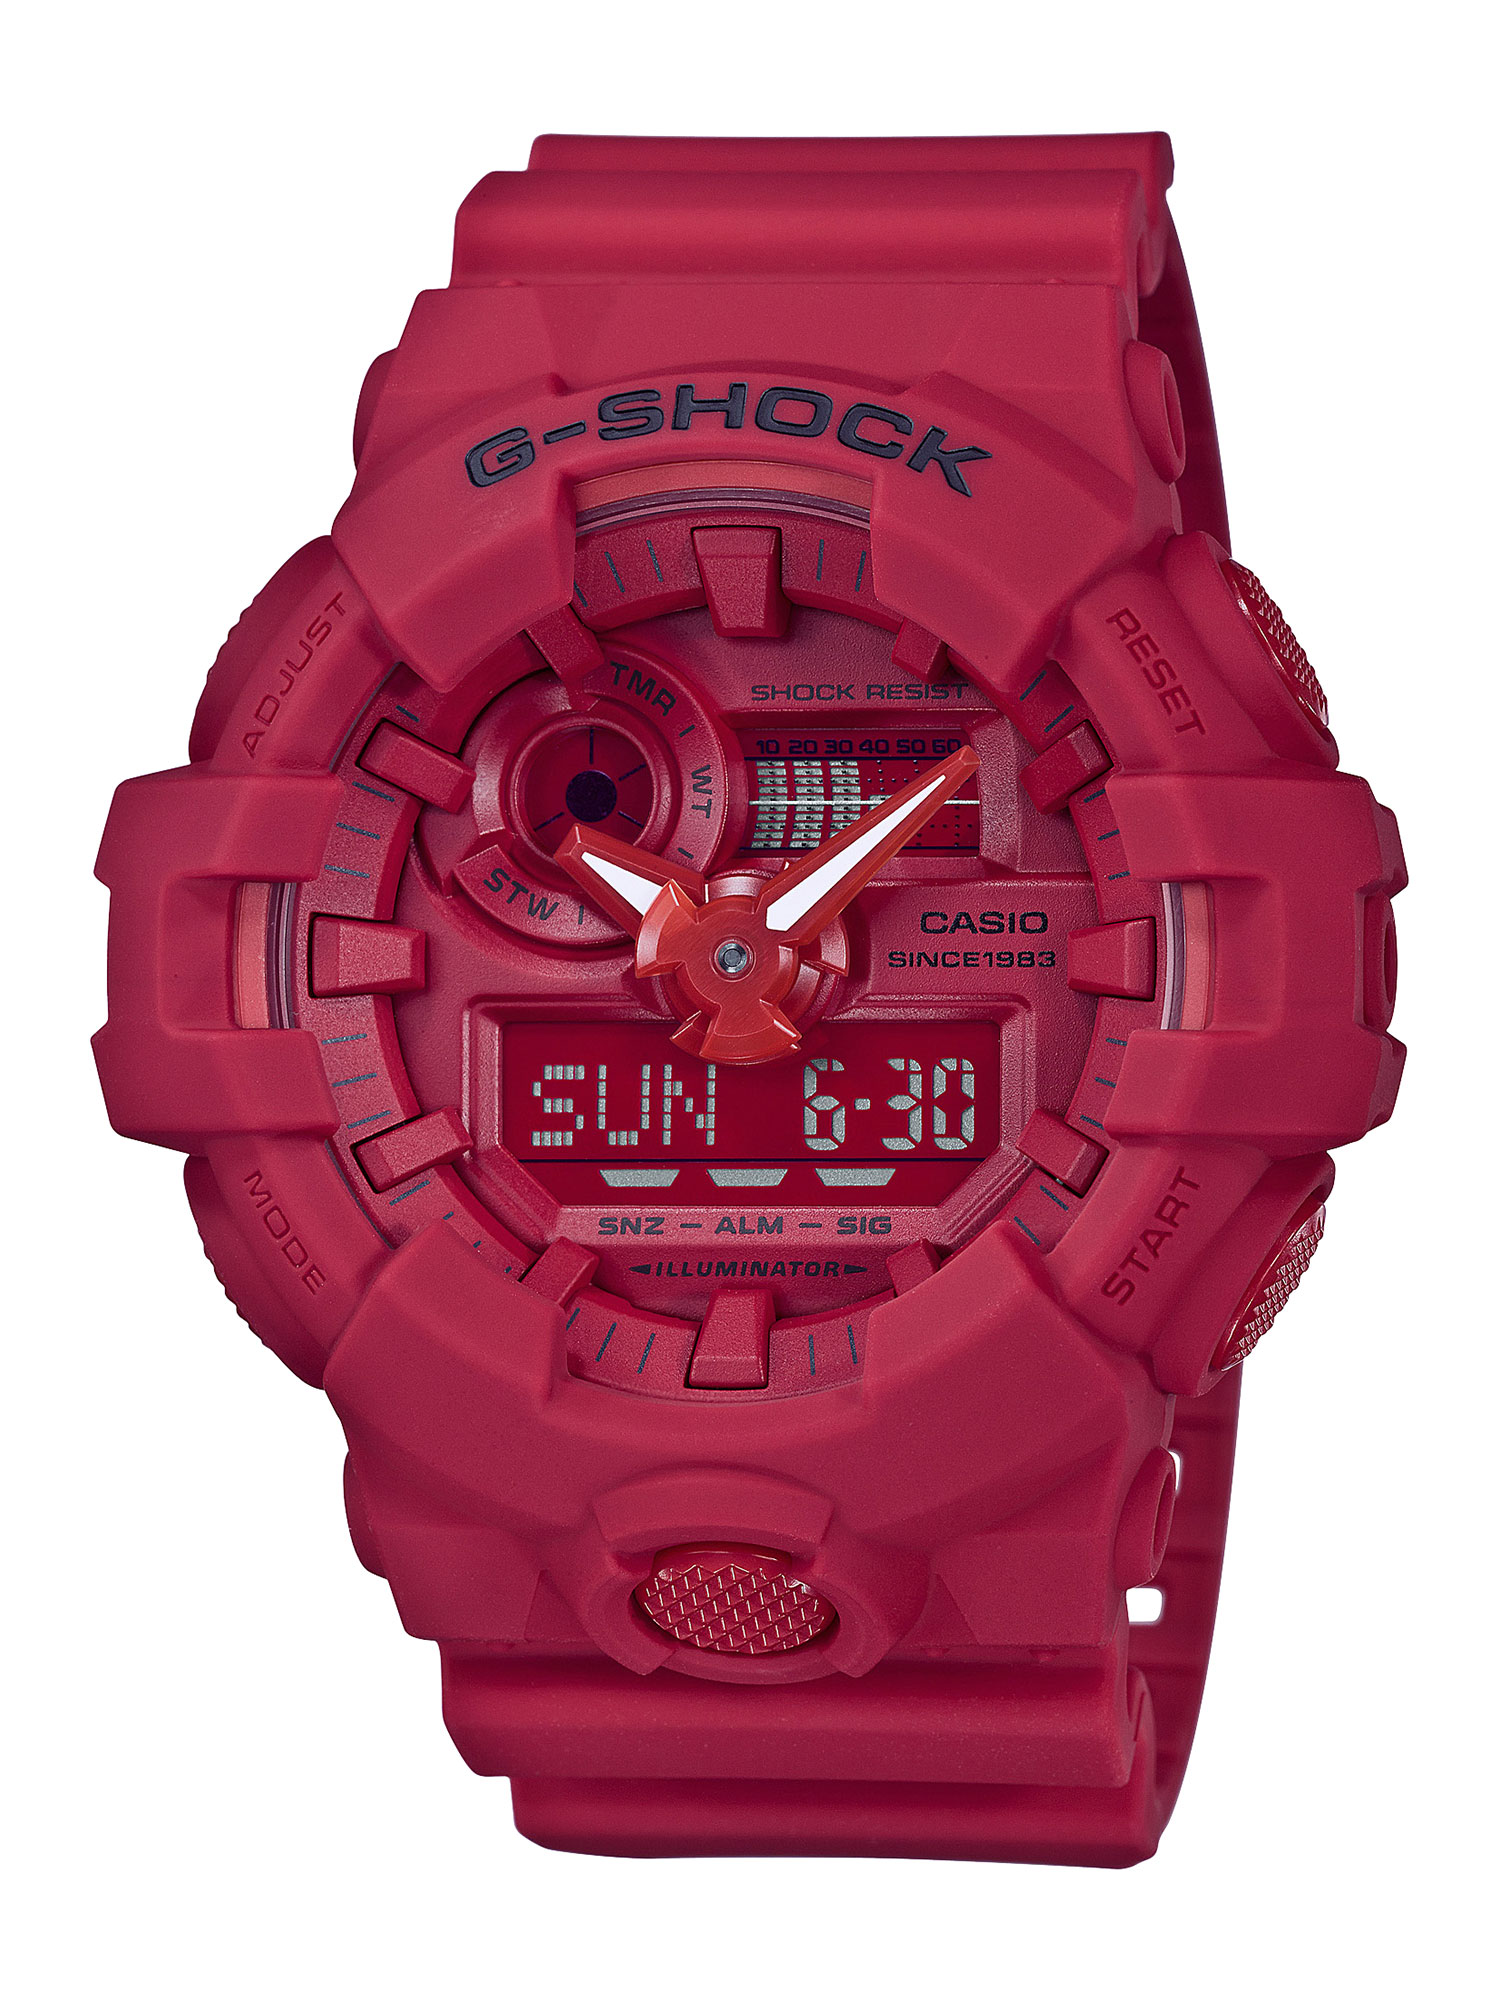 CASIO 35th Anniversary G-SHOCK RED-OUT Collection